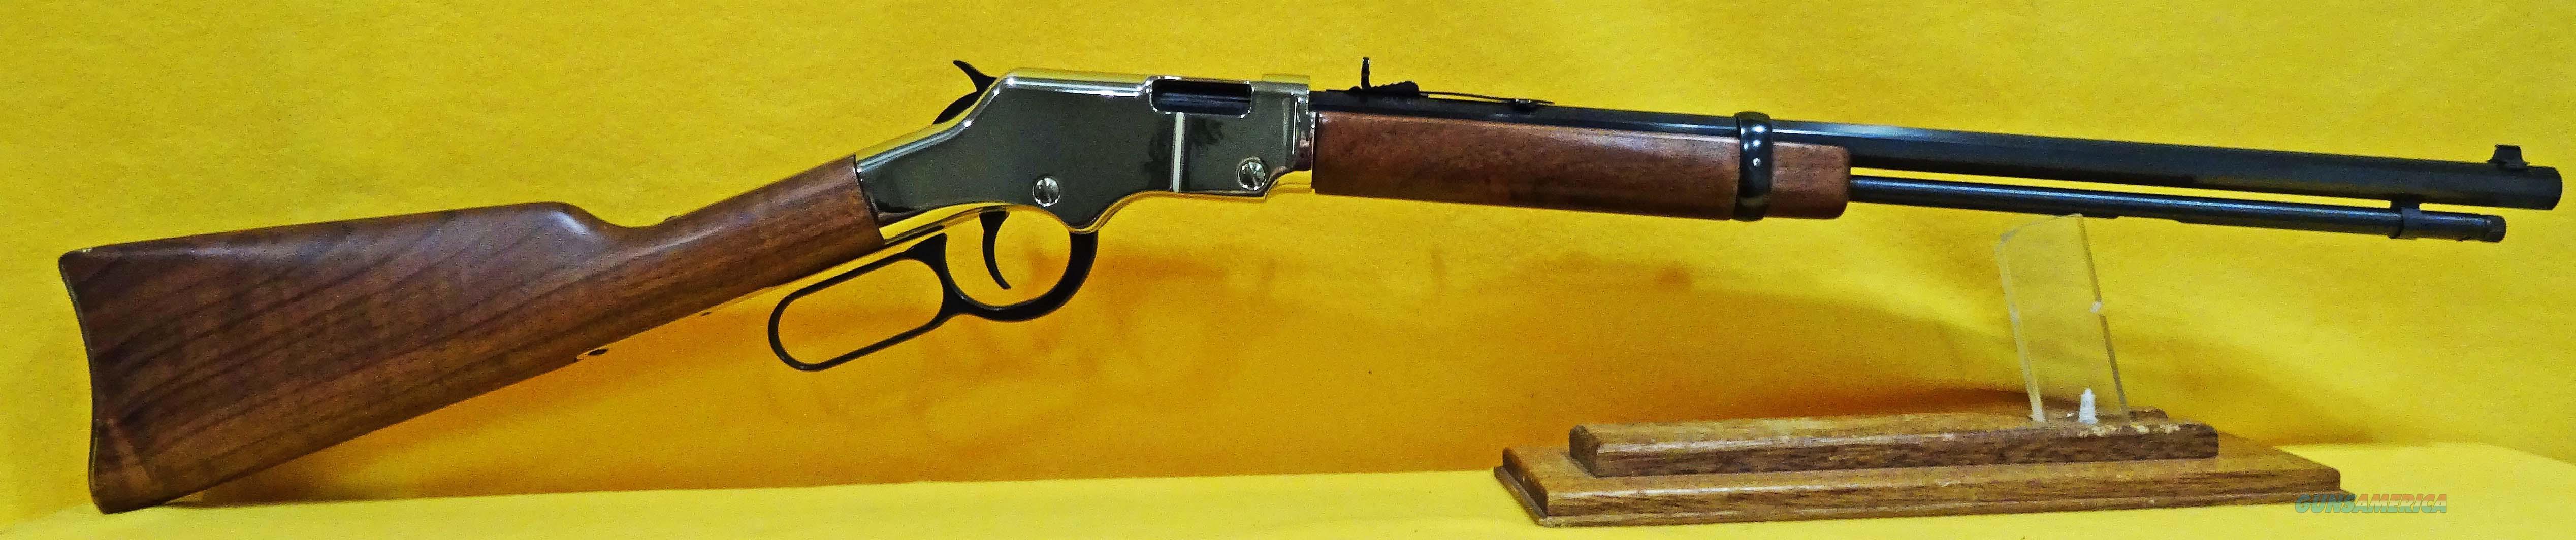 How to read henry rifle serial numbers